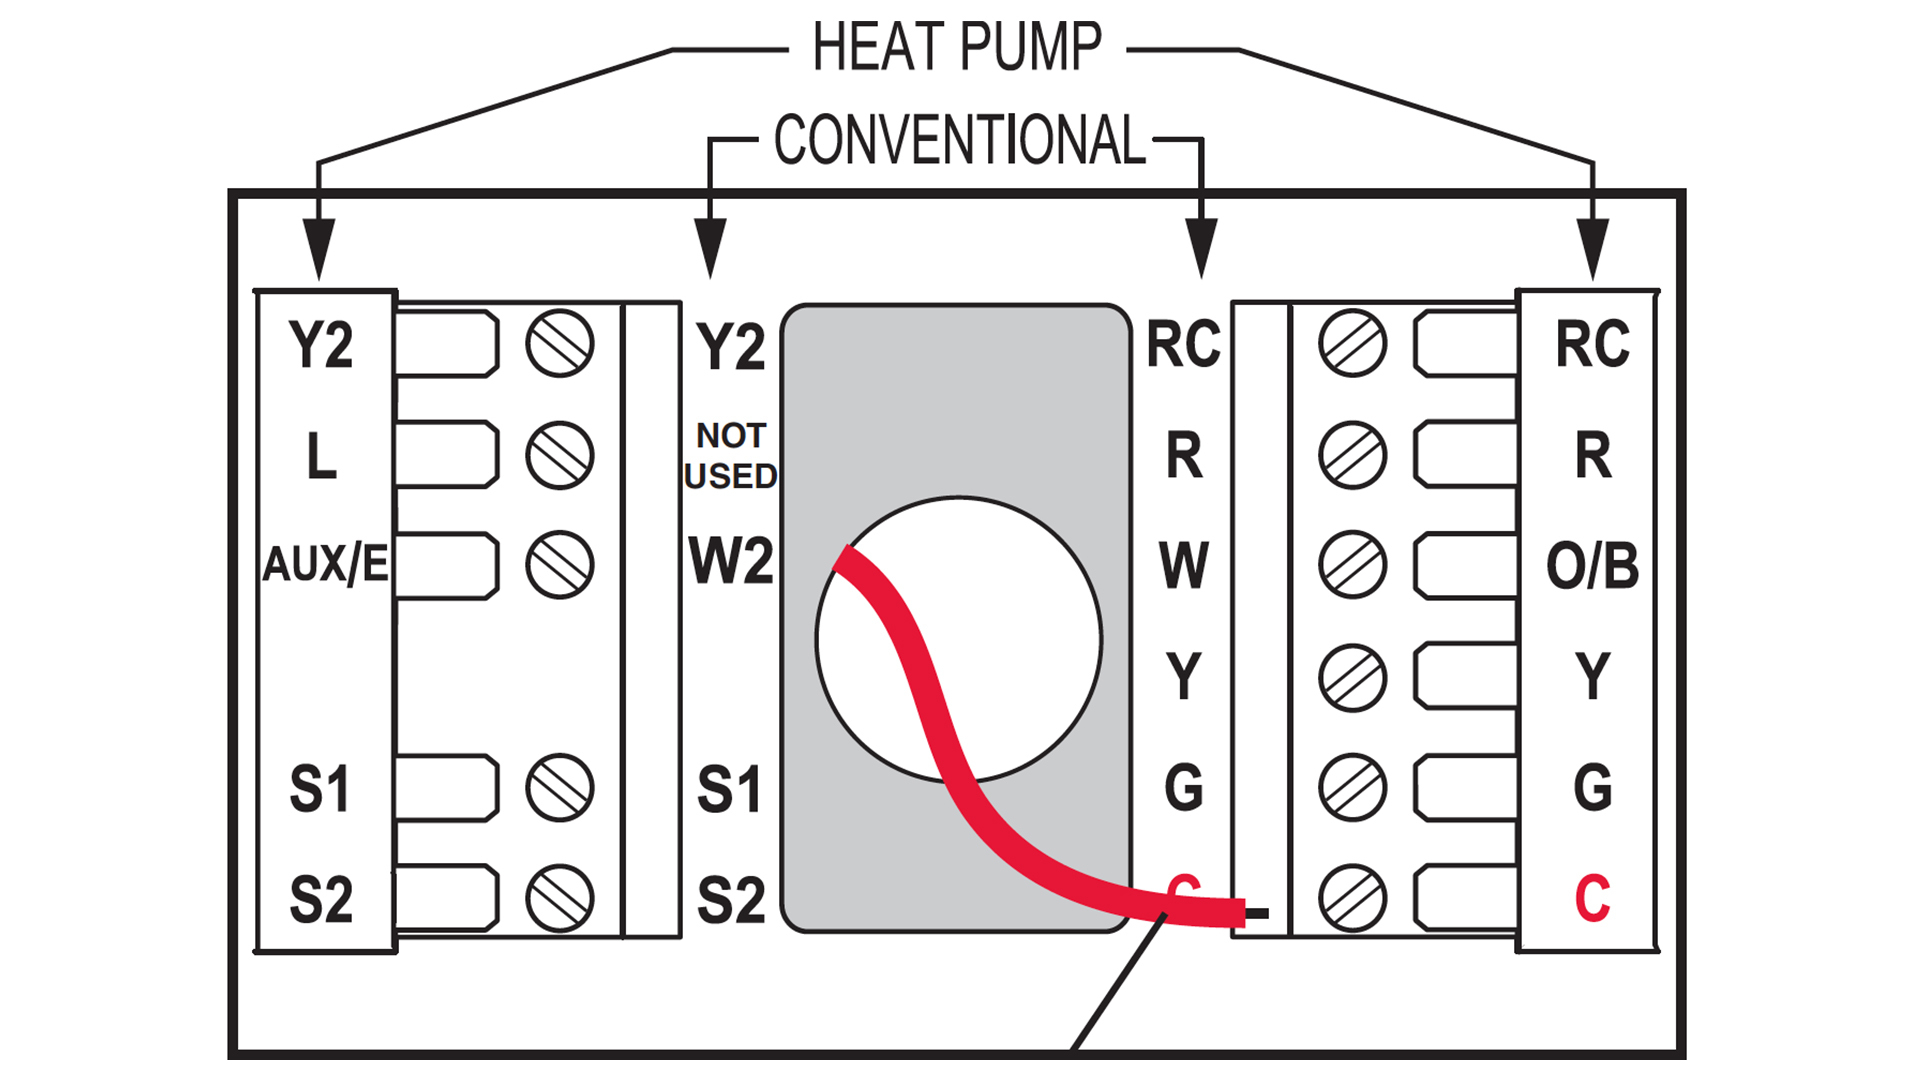 Old Furnace Wiring | Wiring Library - Furnace Thermostat Wiring Diagram